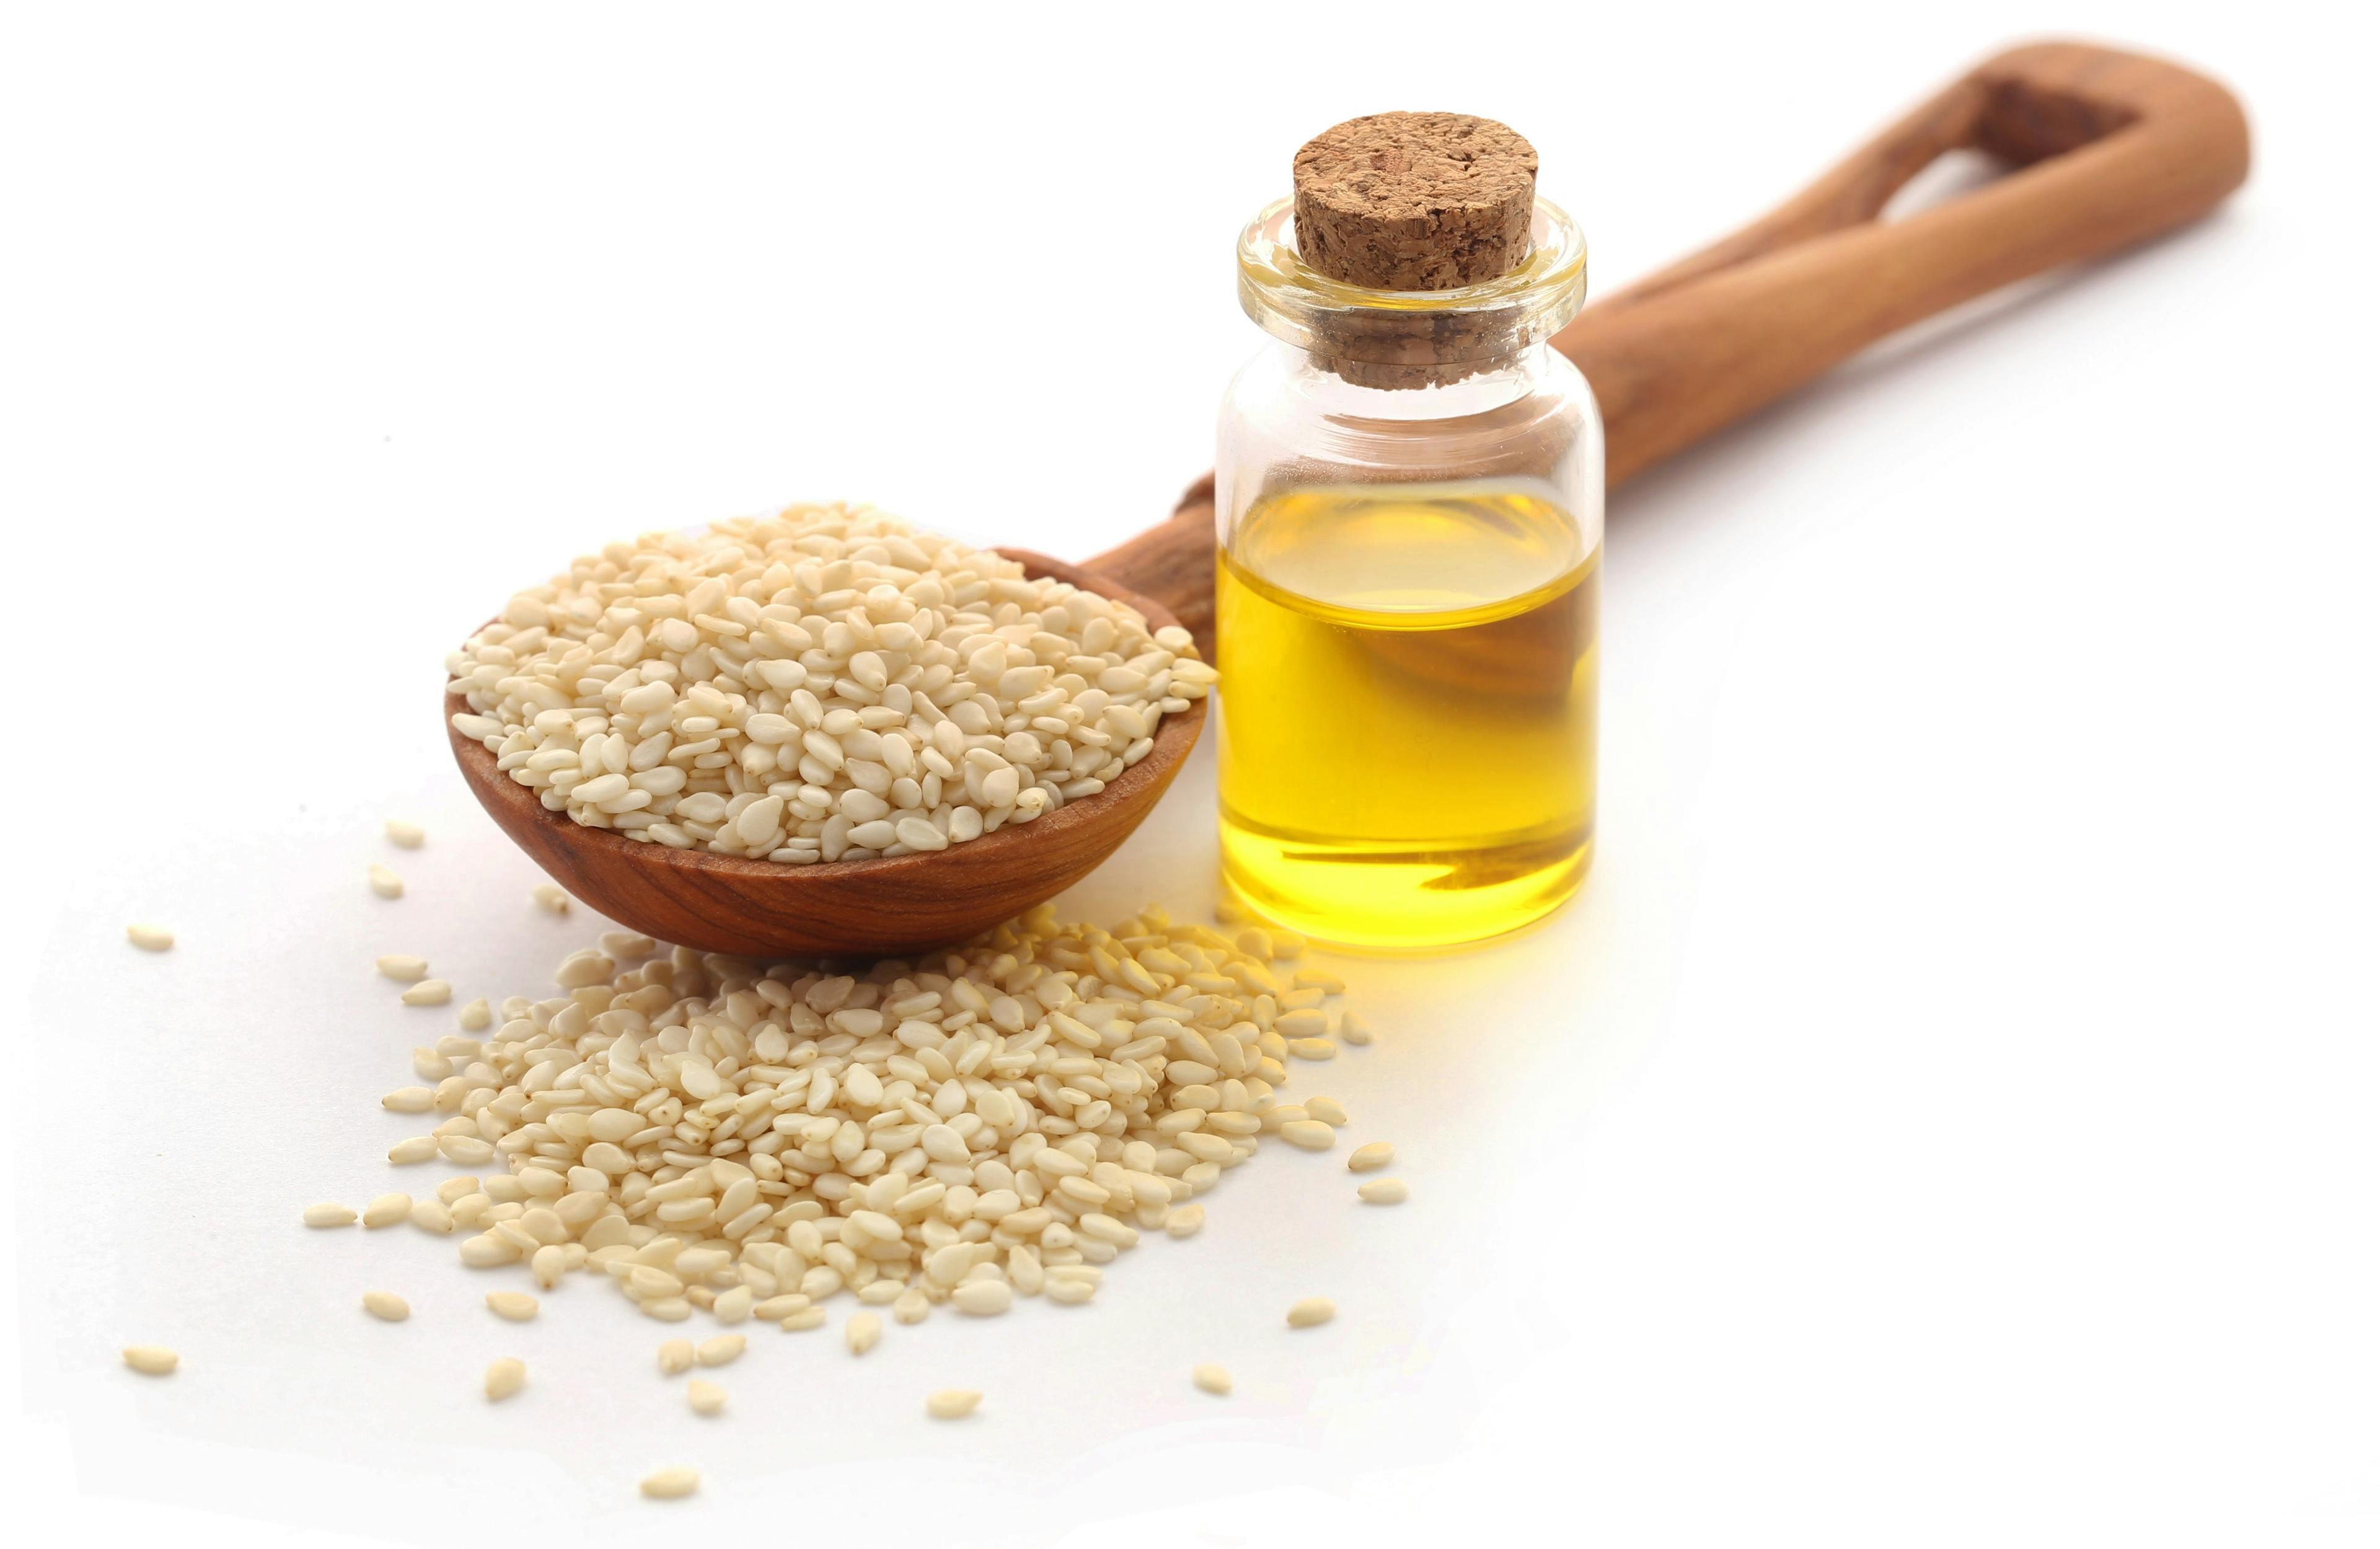 Further, sesame oil increase BMD, serum osteocalcin, procollagen-I C-terminal propeptide (PICP), and decreased collagen cross-linked N-telopeptide (NTx). Image Credit: © Swapan - stock.adobe.com